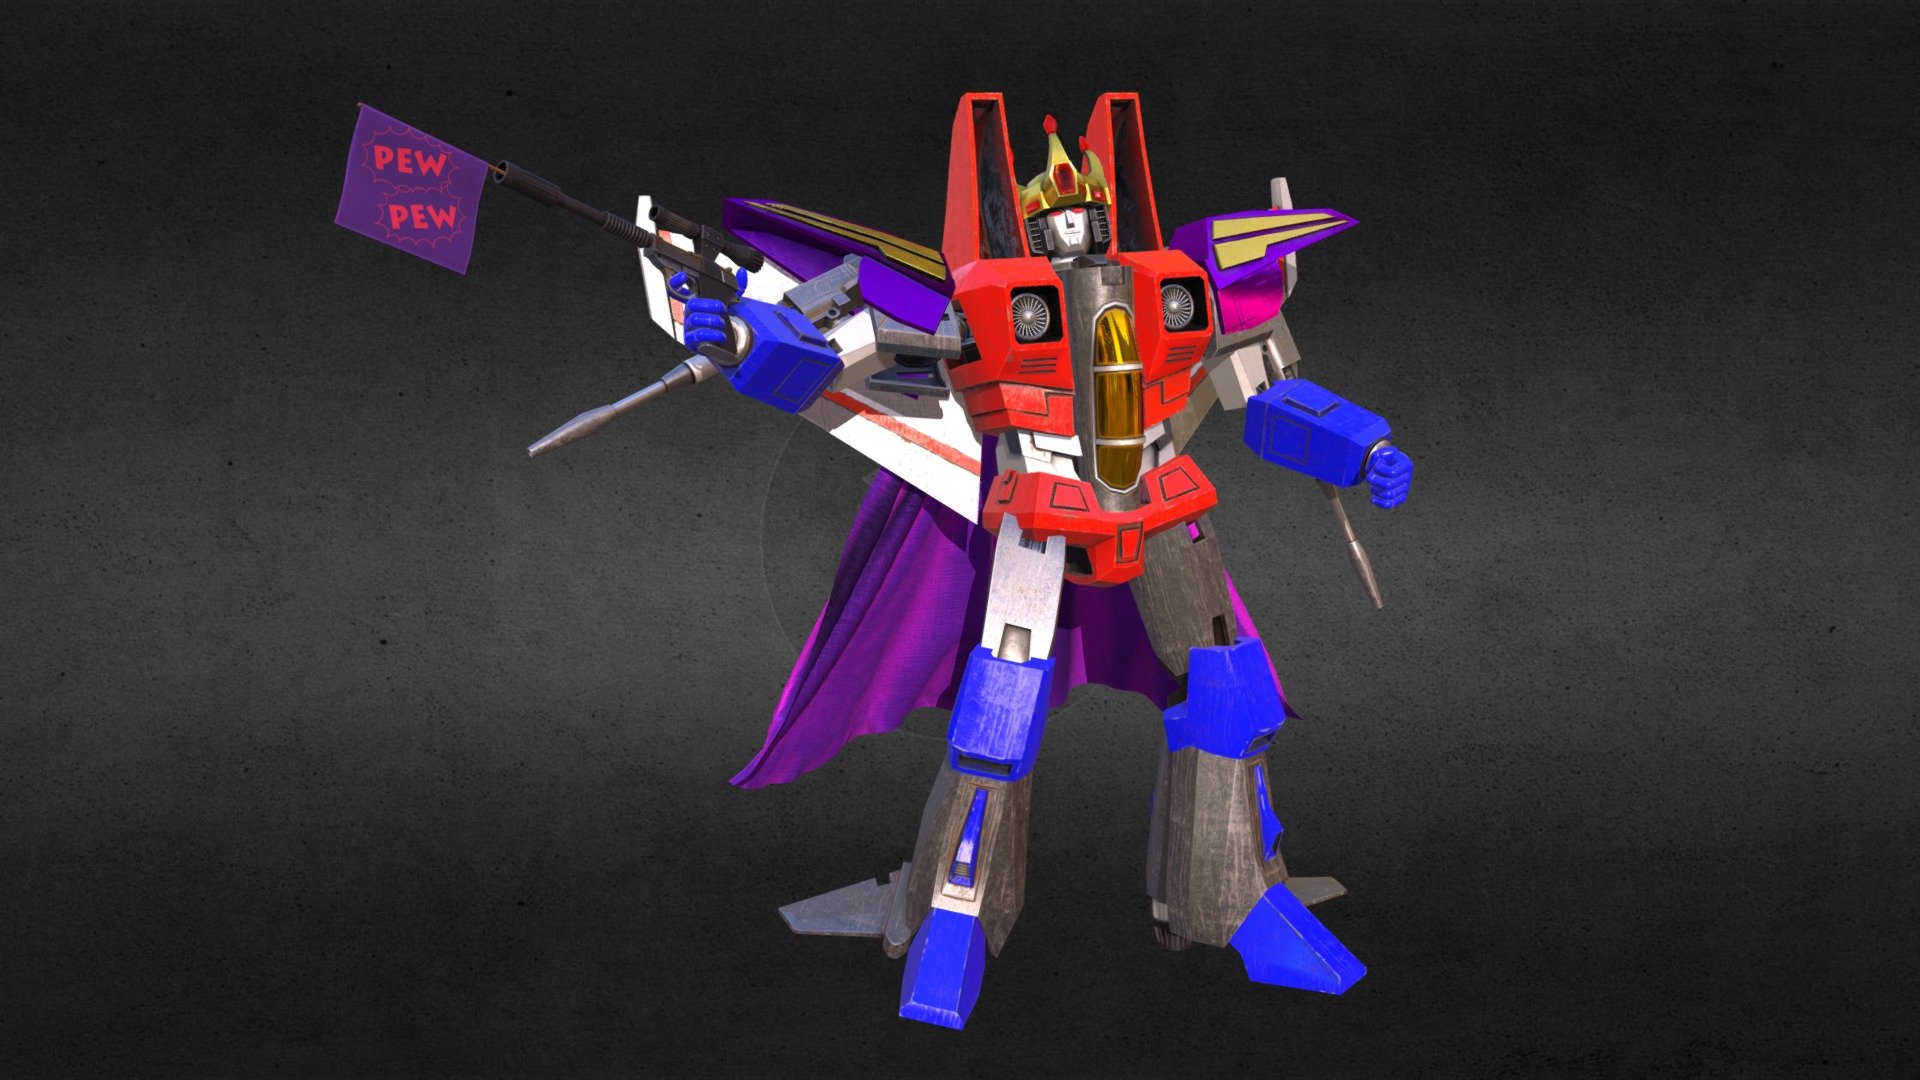 Starscream wearing his corronation outfit from the original movie and waving around a toy gun version of Megatron made as an example for my students. I used various references for modling him, including Brad Groatman's mode here on Sketchfab (https://sketchfab.com/3d-models/starscream-3e5862f765cb4328936e737faa6530f2), Ken Christiansen's concept art (http://kenchristiansen.com/#/transformers-video-games-concept-art/), and various versions depicted across the many toy lines 3d model